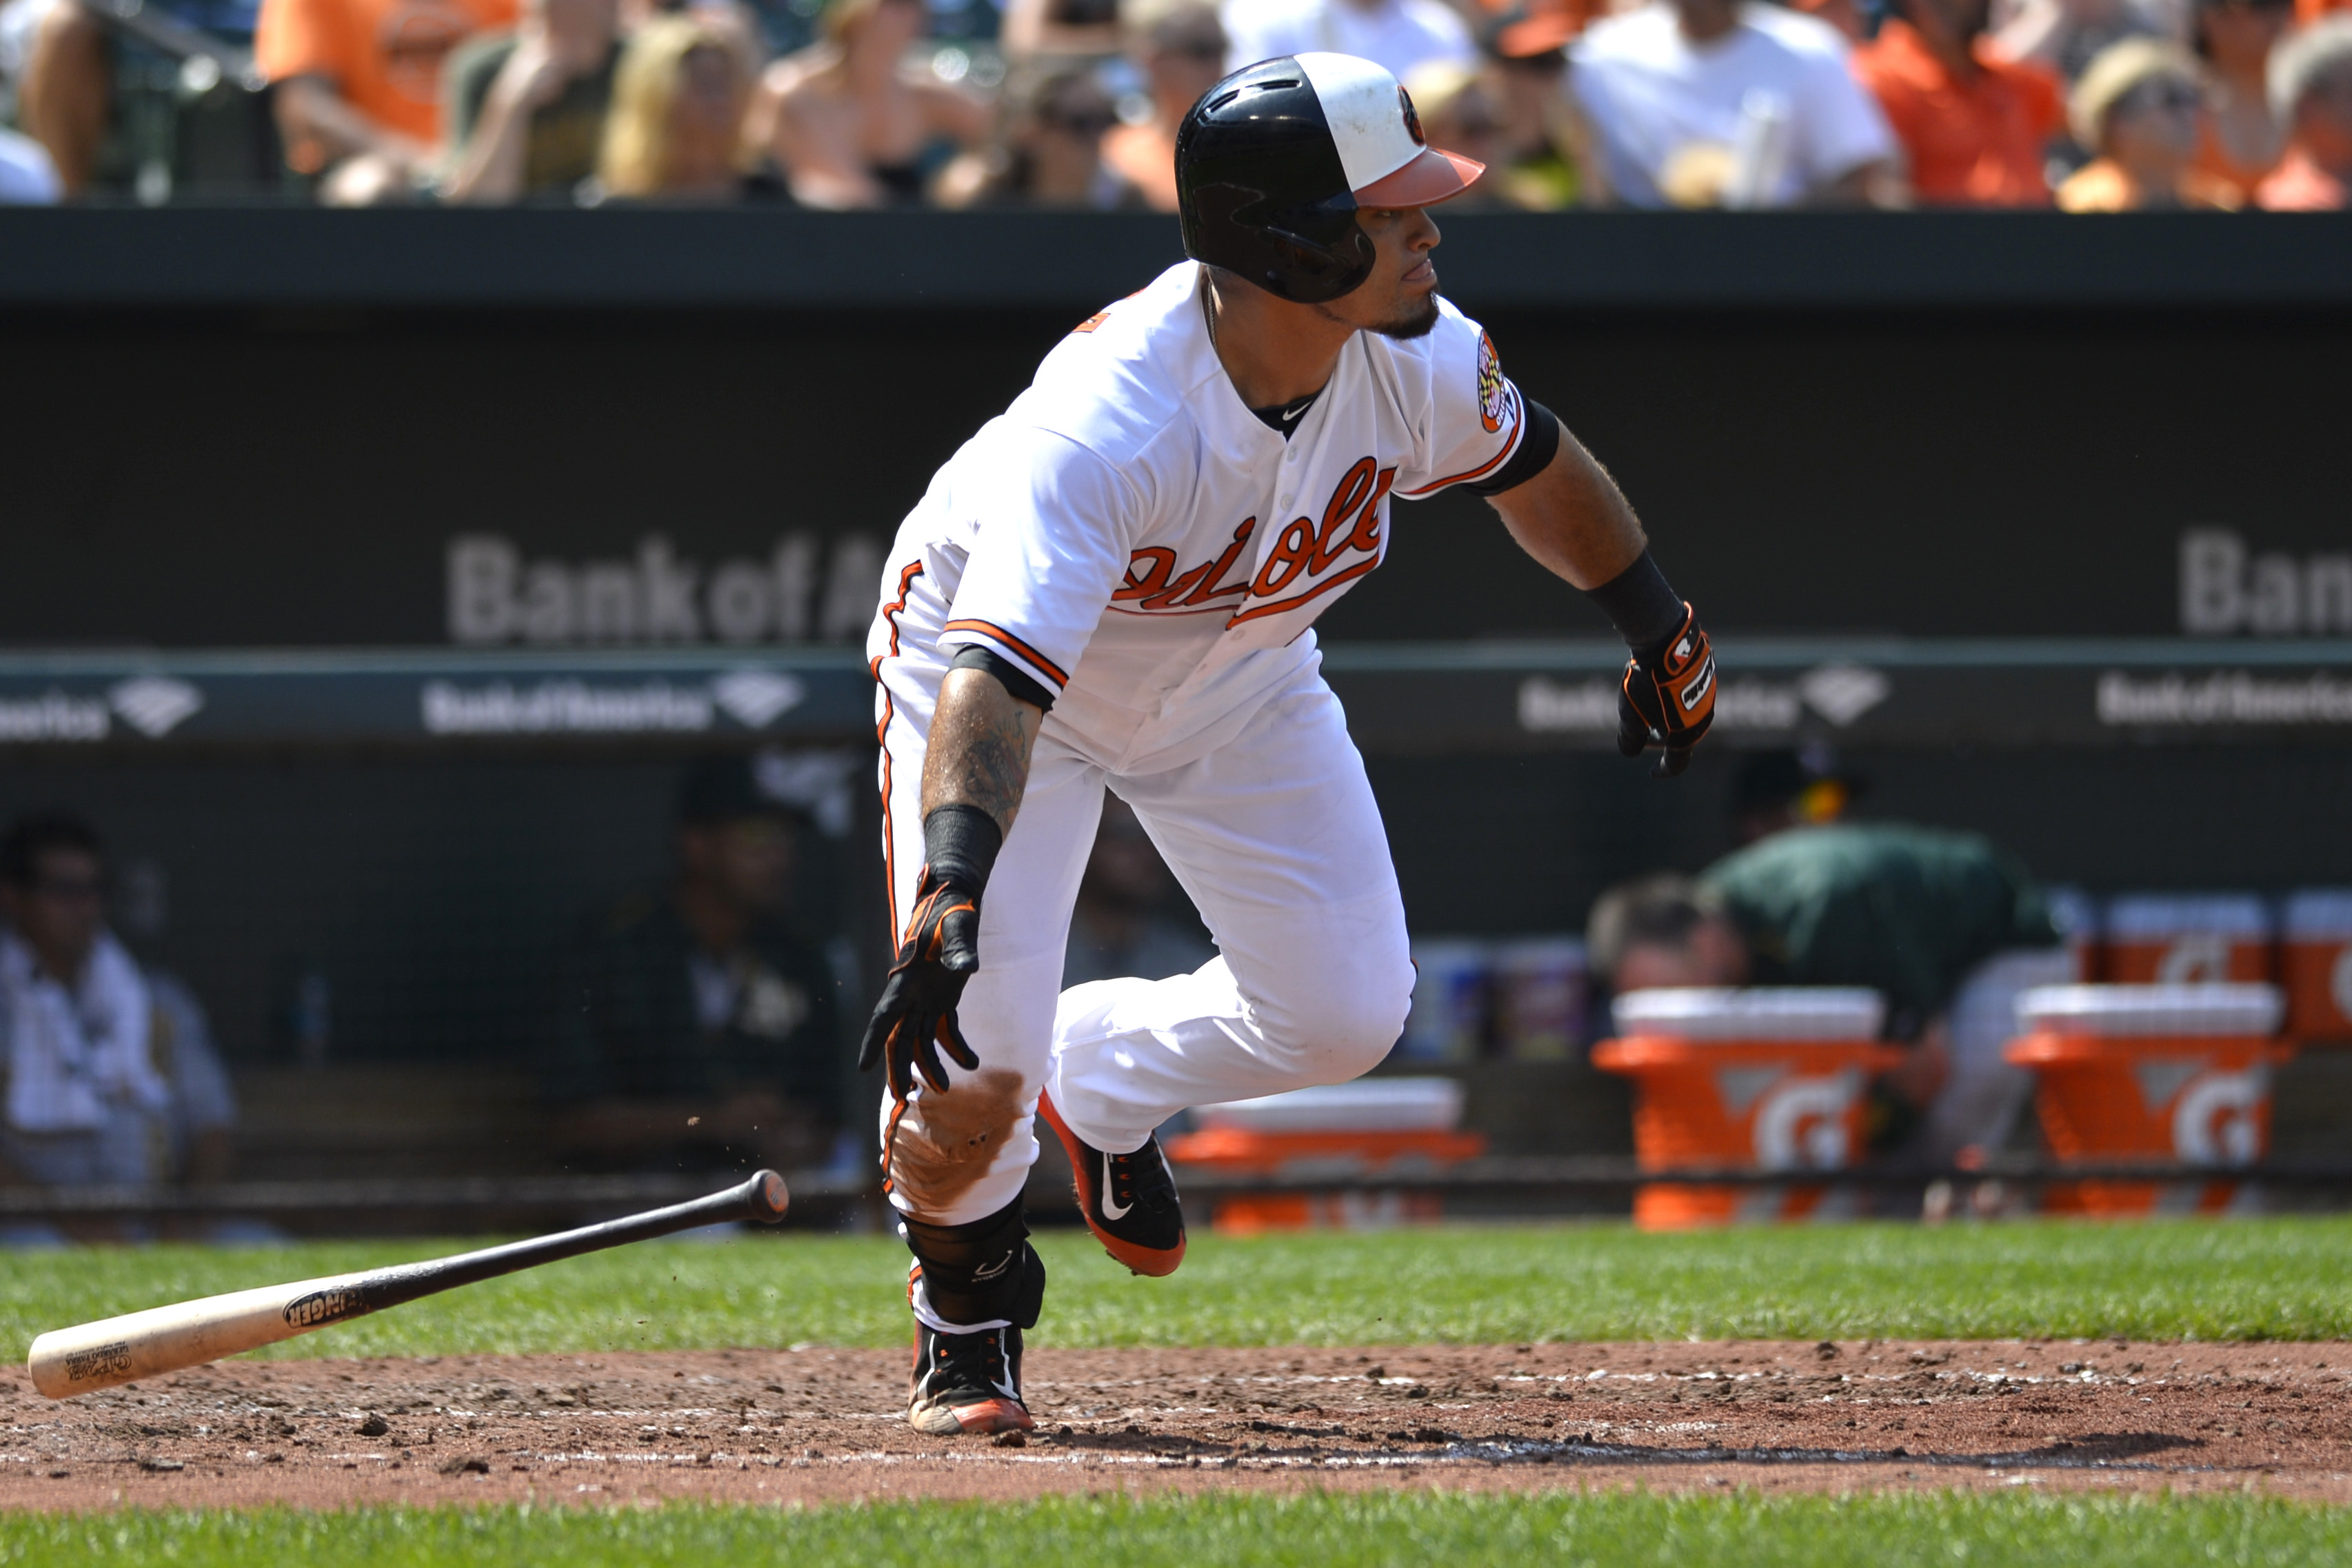 Gerardo Parra posted his best week in an Oriole uniform